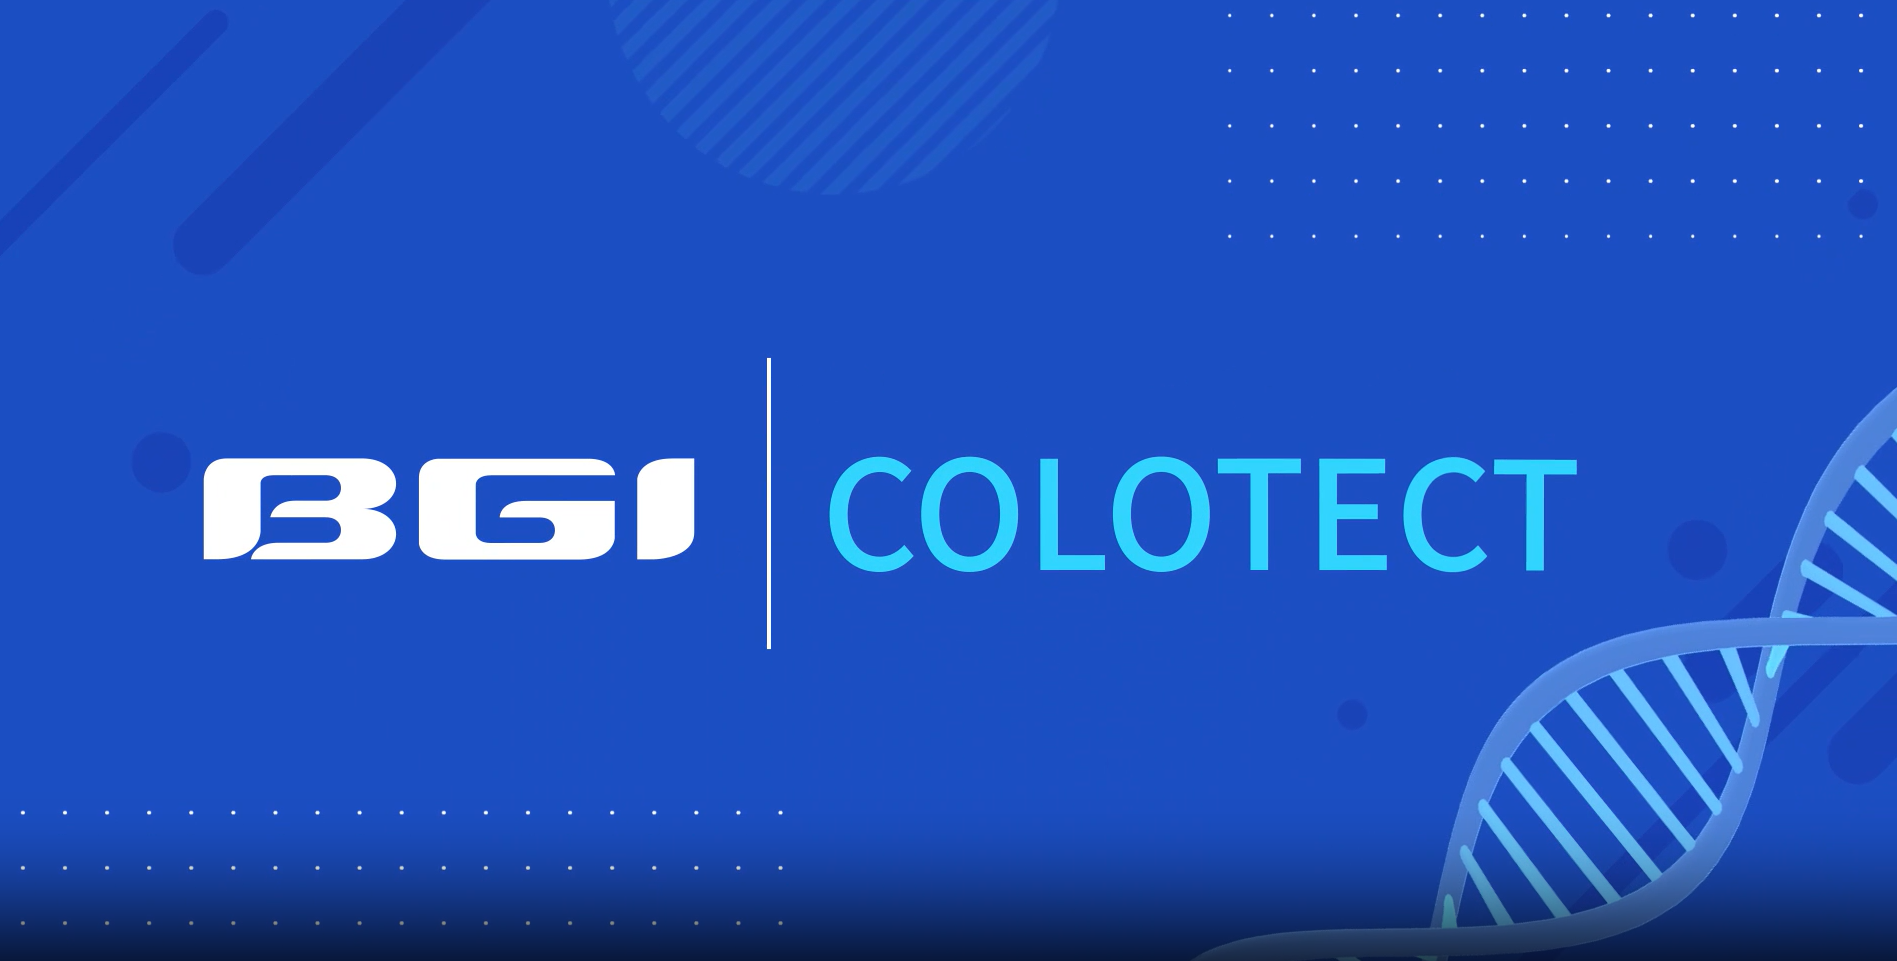 COLOTECT 1.0 Sampling Collection Procedure